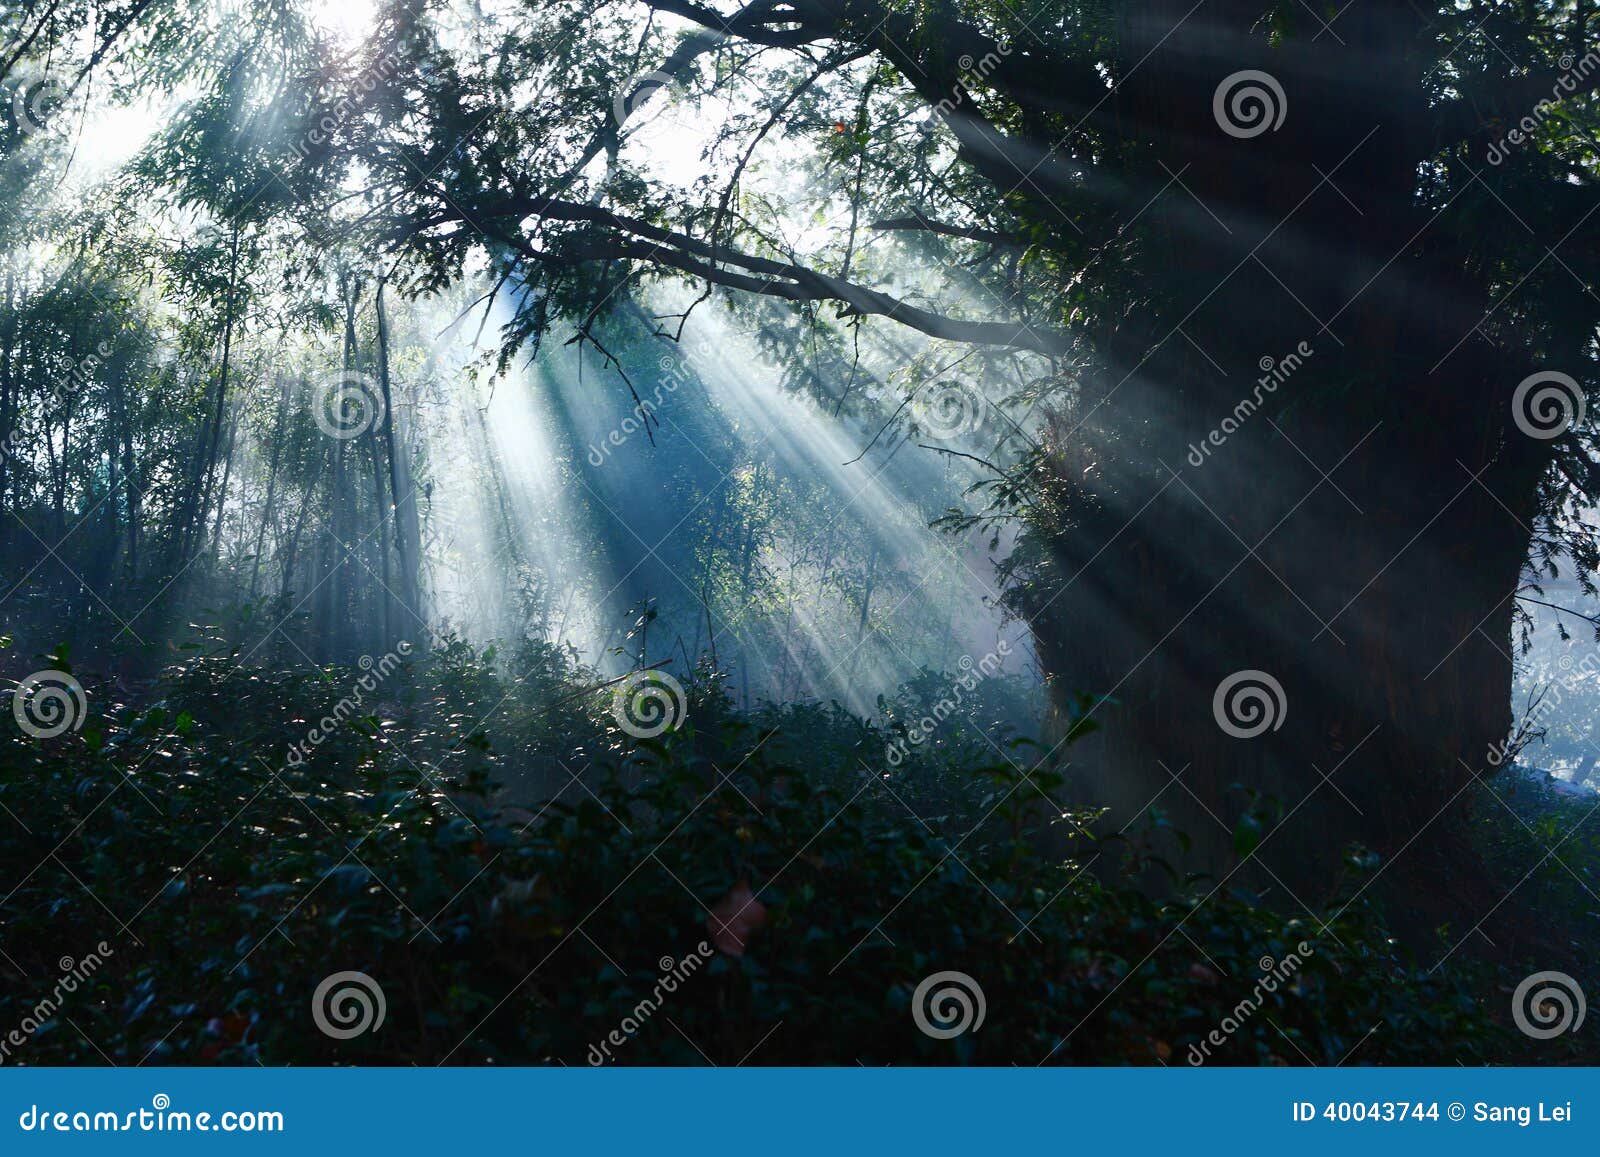 sunlight in forests